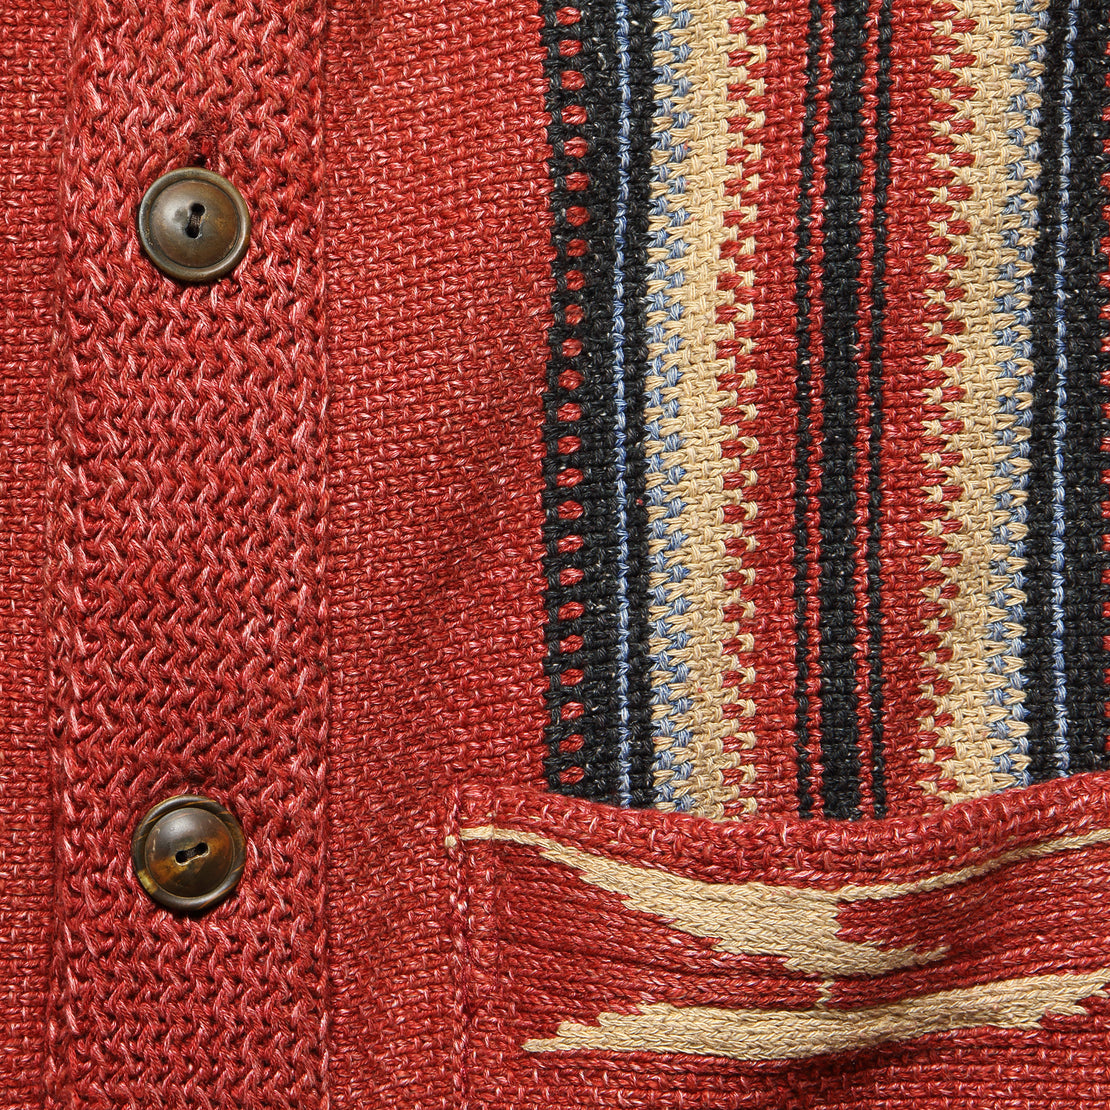 Chimayo Shawl Collar Cardigan - Faded Red - RRL - STAG Provisions - Tops - Sweater